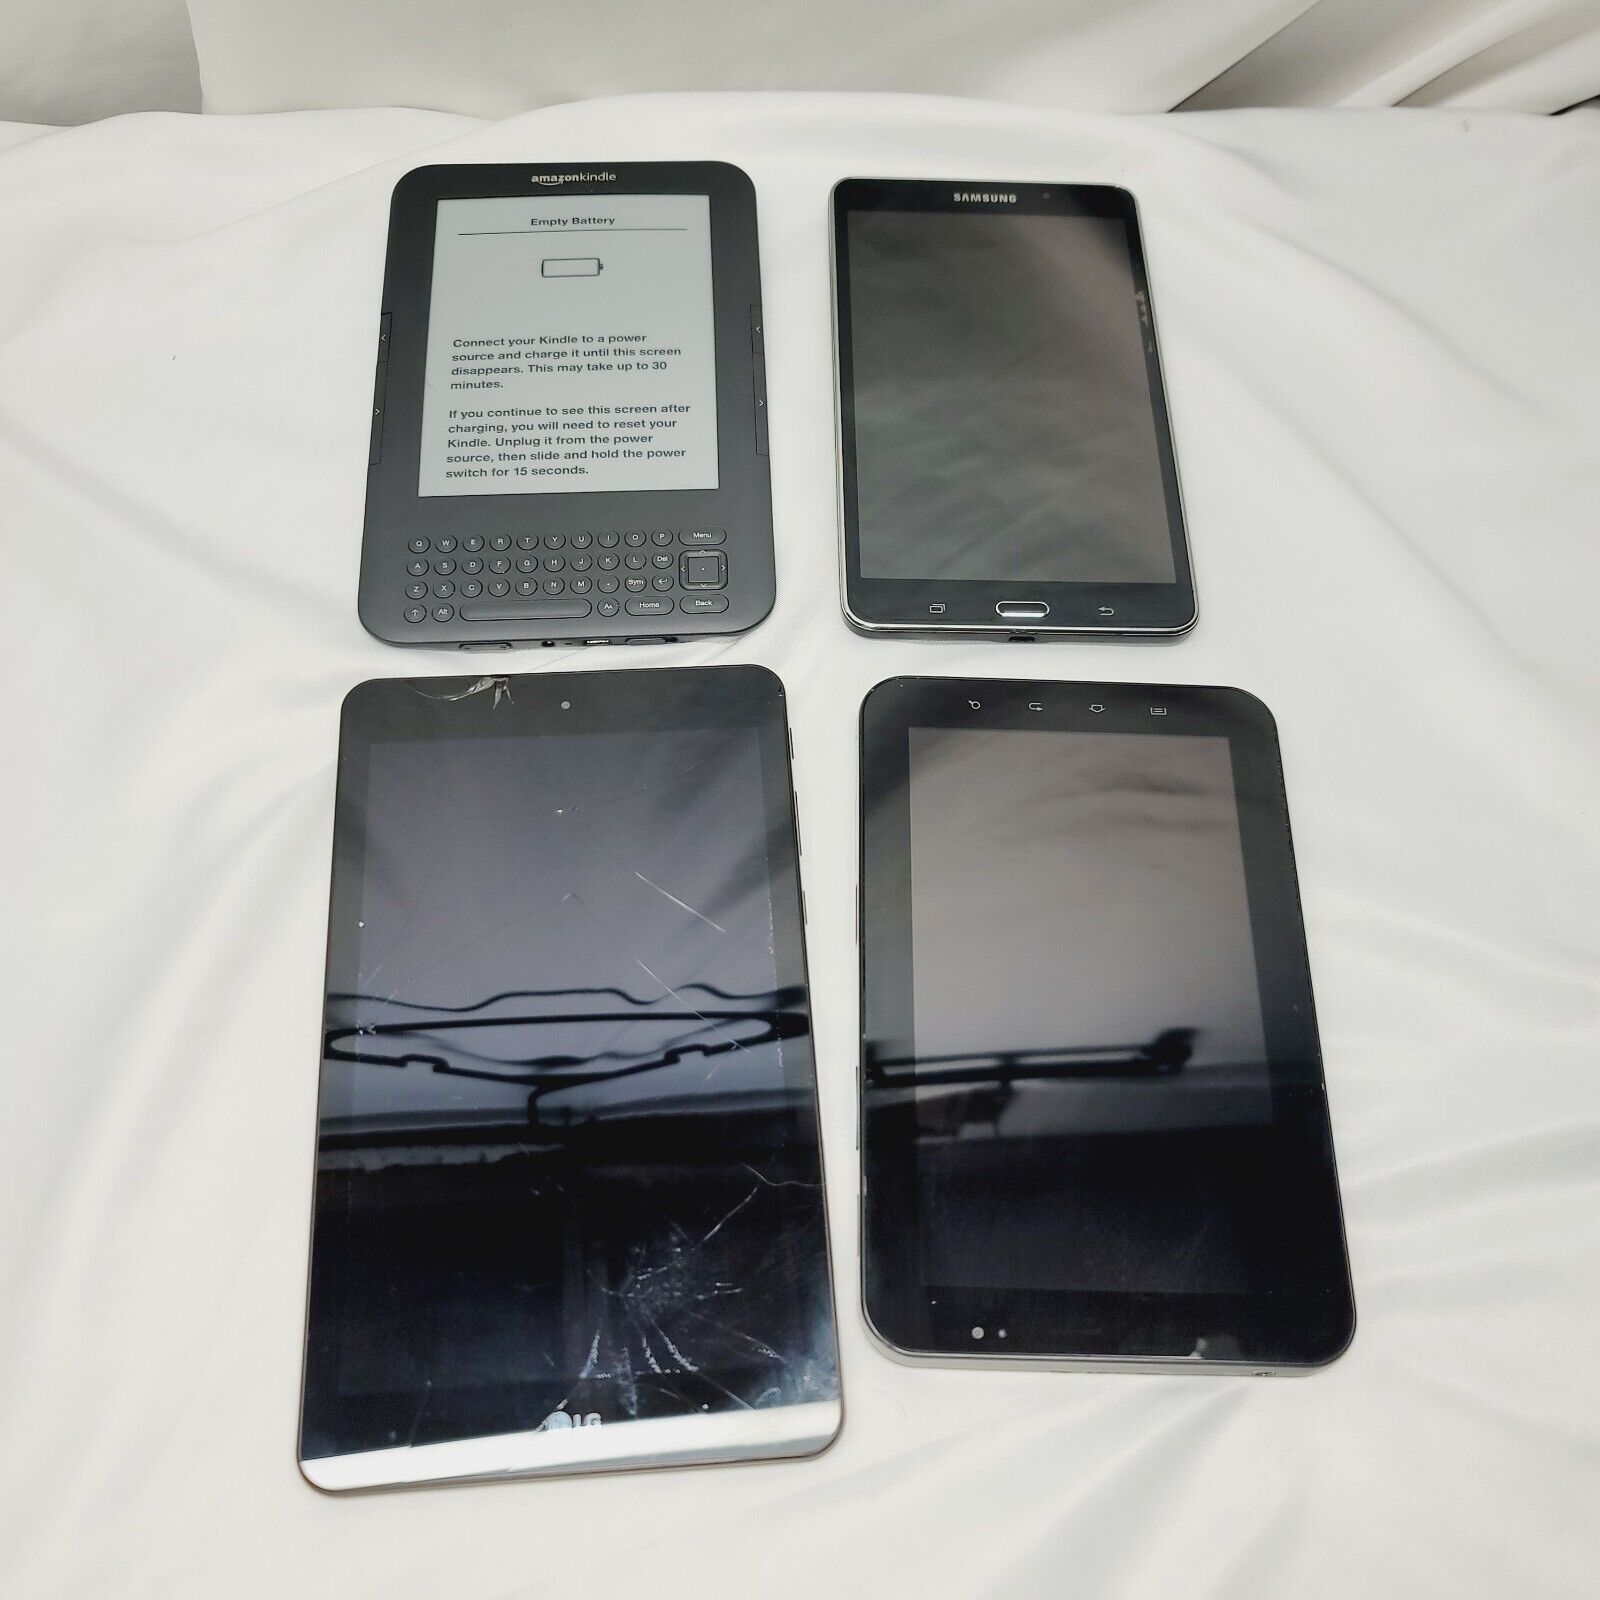 Lot Of 4 Tablets For Parts Or Repair, Precious Metal Recovery LG, Galaxy, Kindle